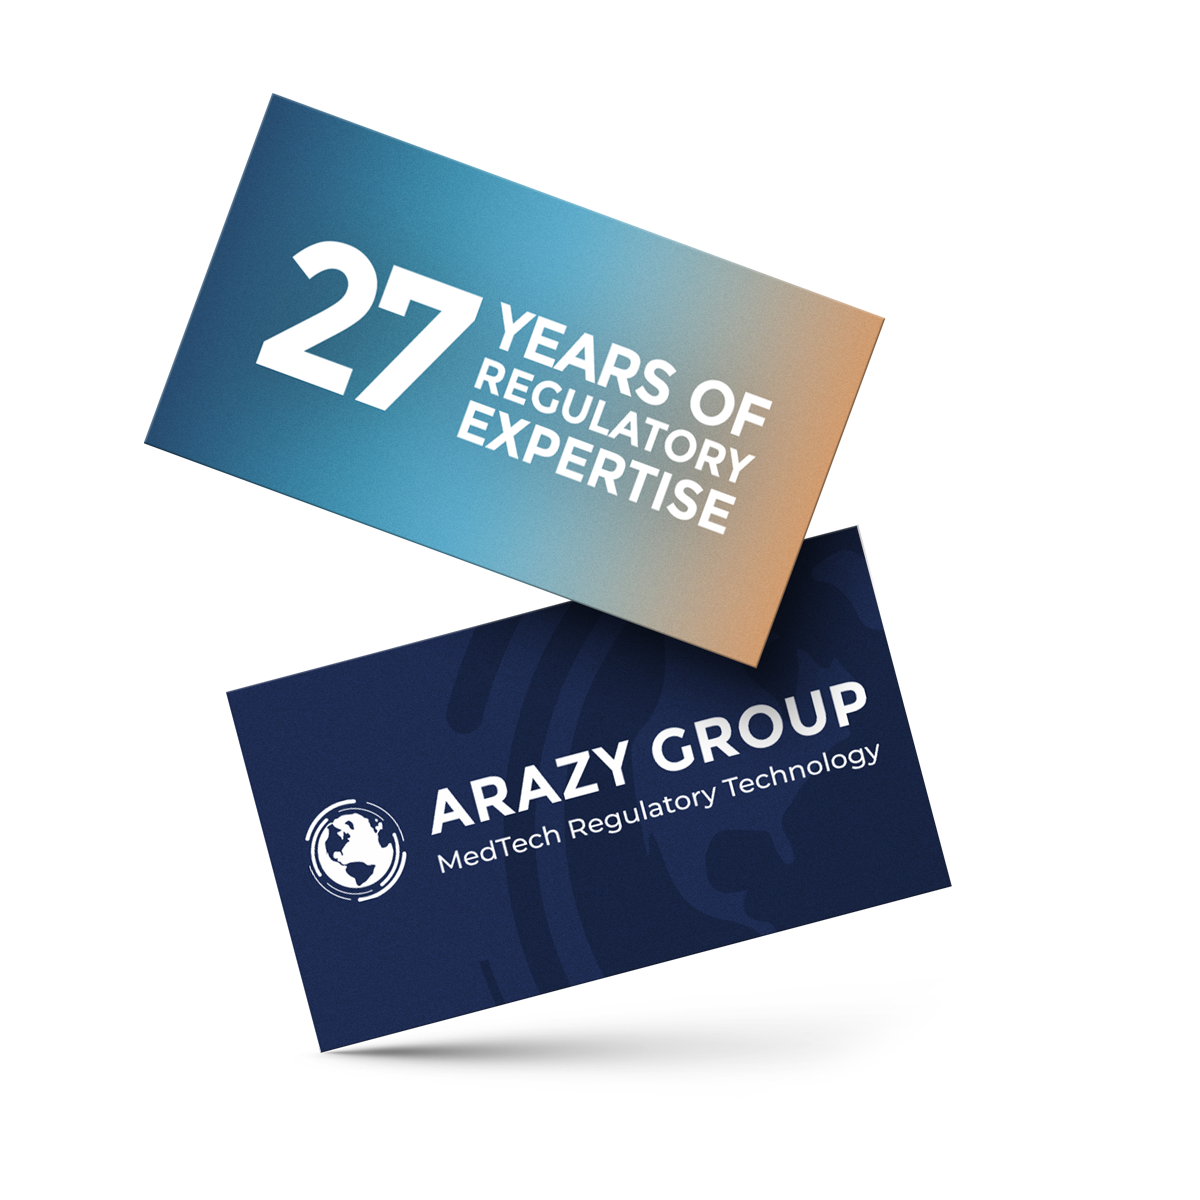 1Arazzy-Group-27-years-of-expertise